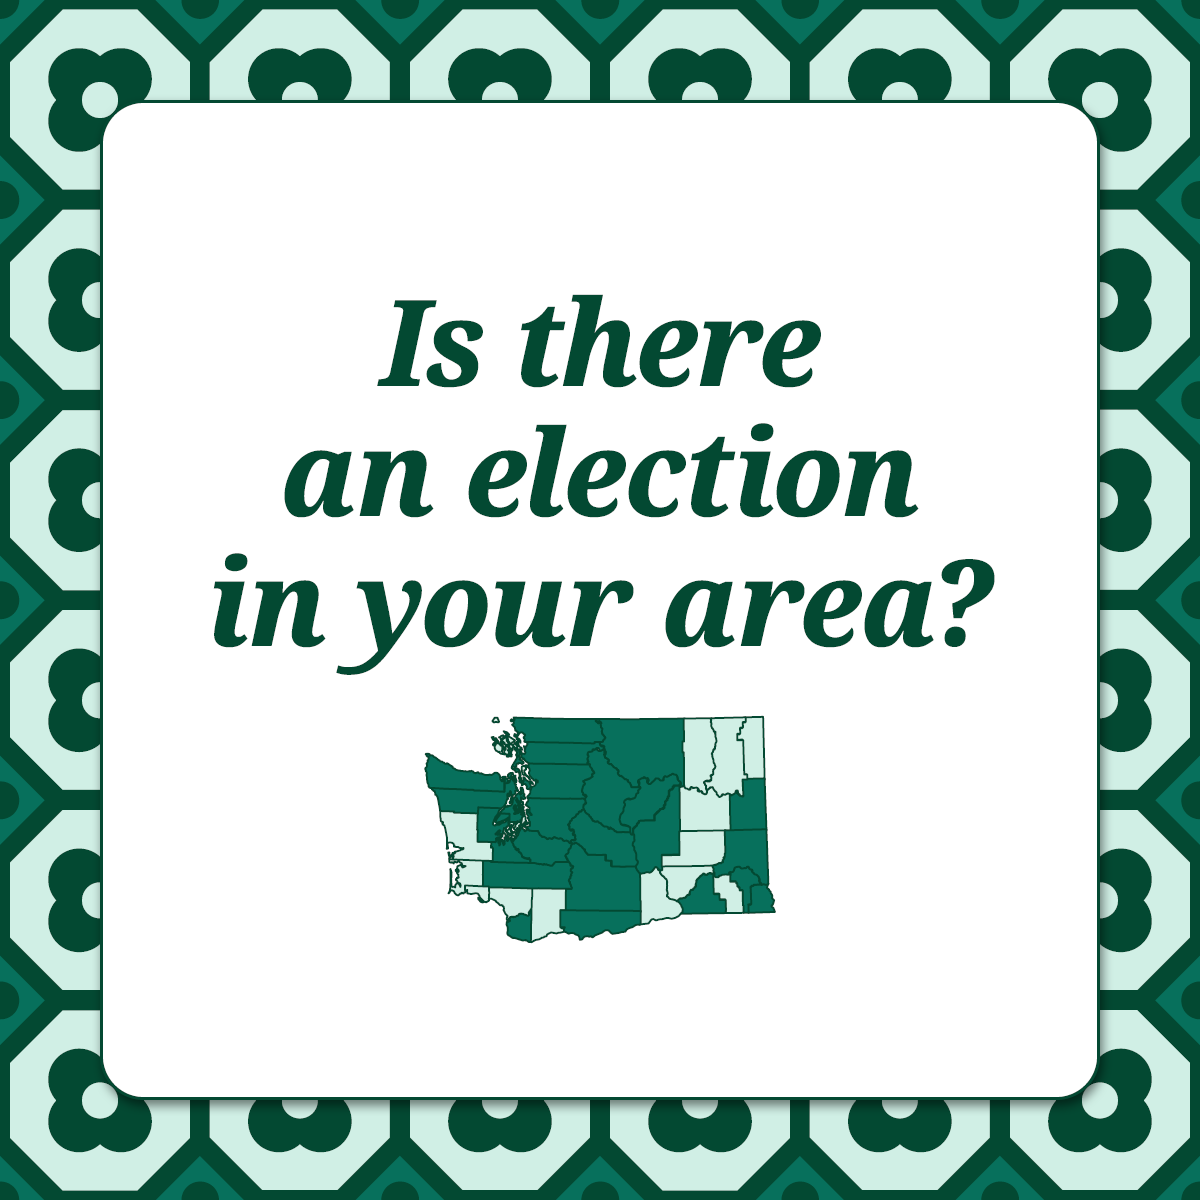 Only 25 of our 39 counties have local measures on the ballot for the April 23  Special Election, and not all voters in a county live in a district having an election. To find out if there’s an election in your area, log in to VoteWA.gov